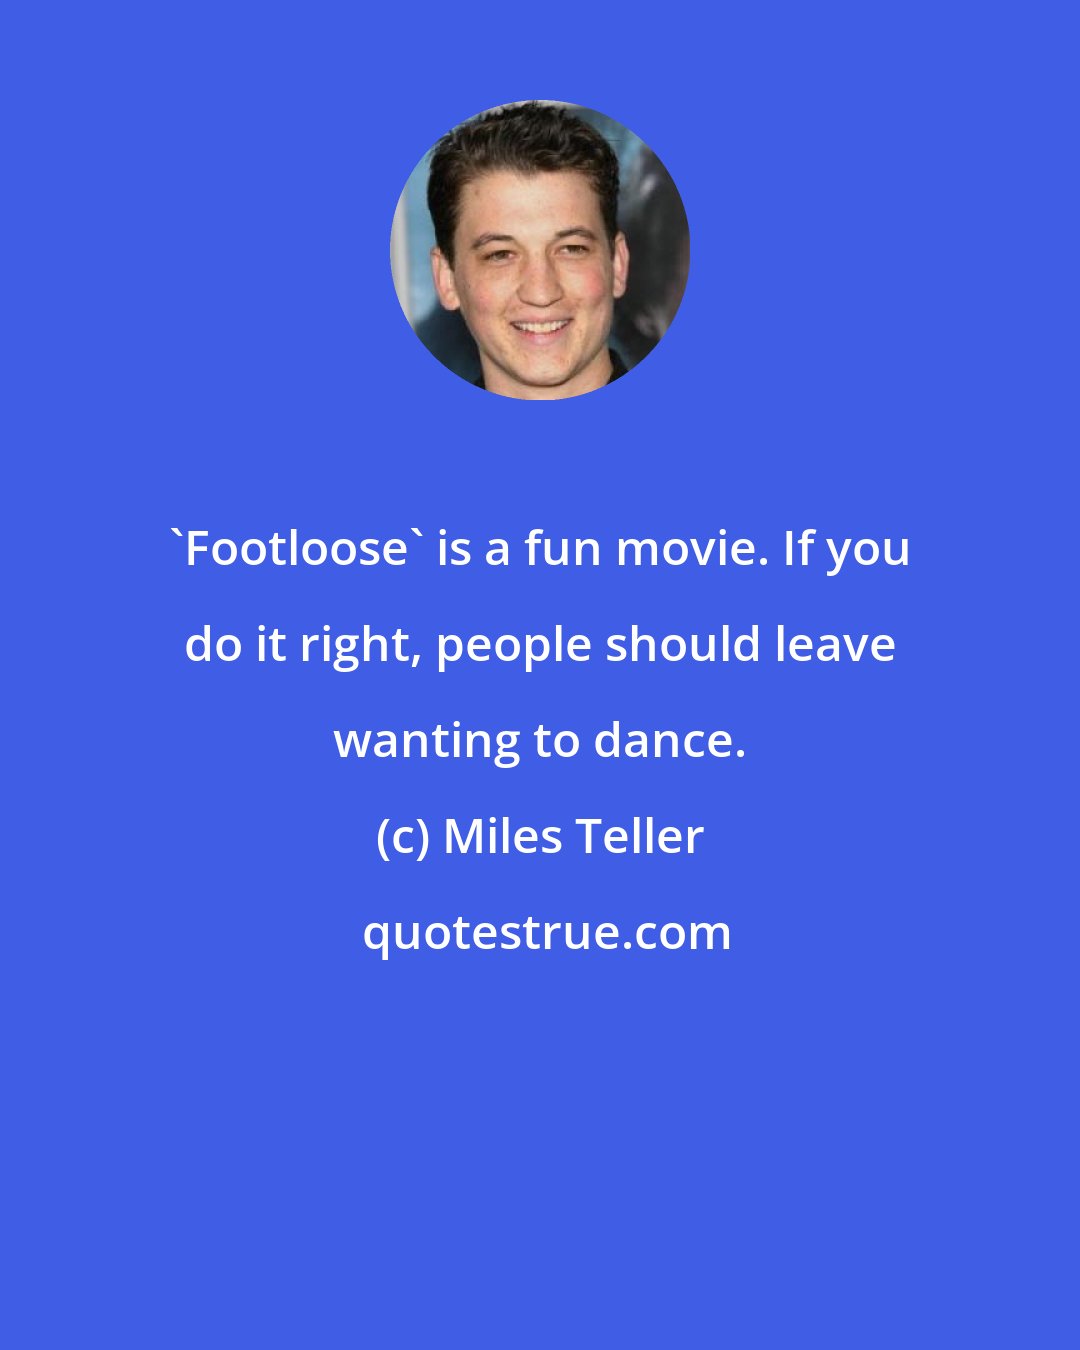 Miles Teller: 'Footloose' is a fun movie. If you do it right, people should leave wanting to dance.